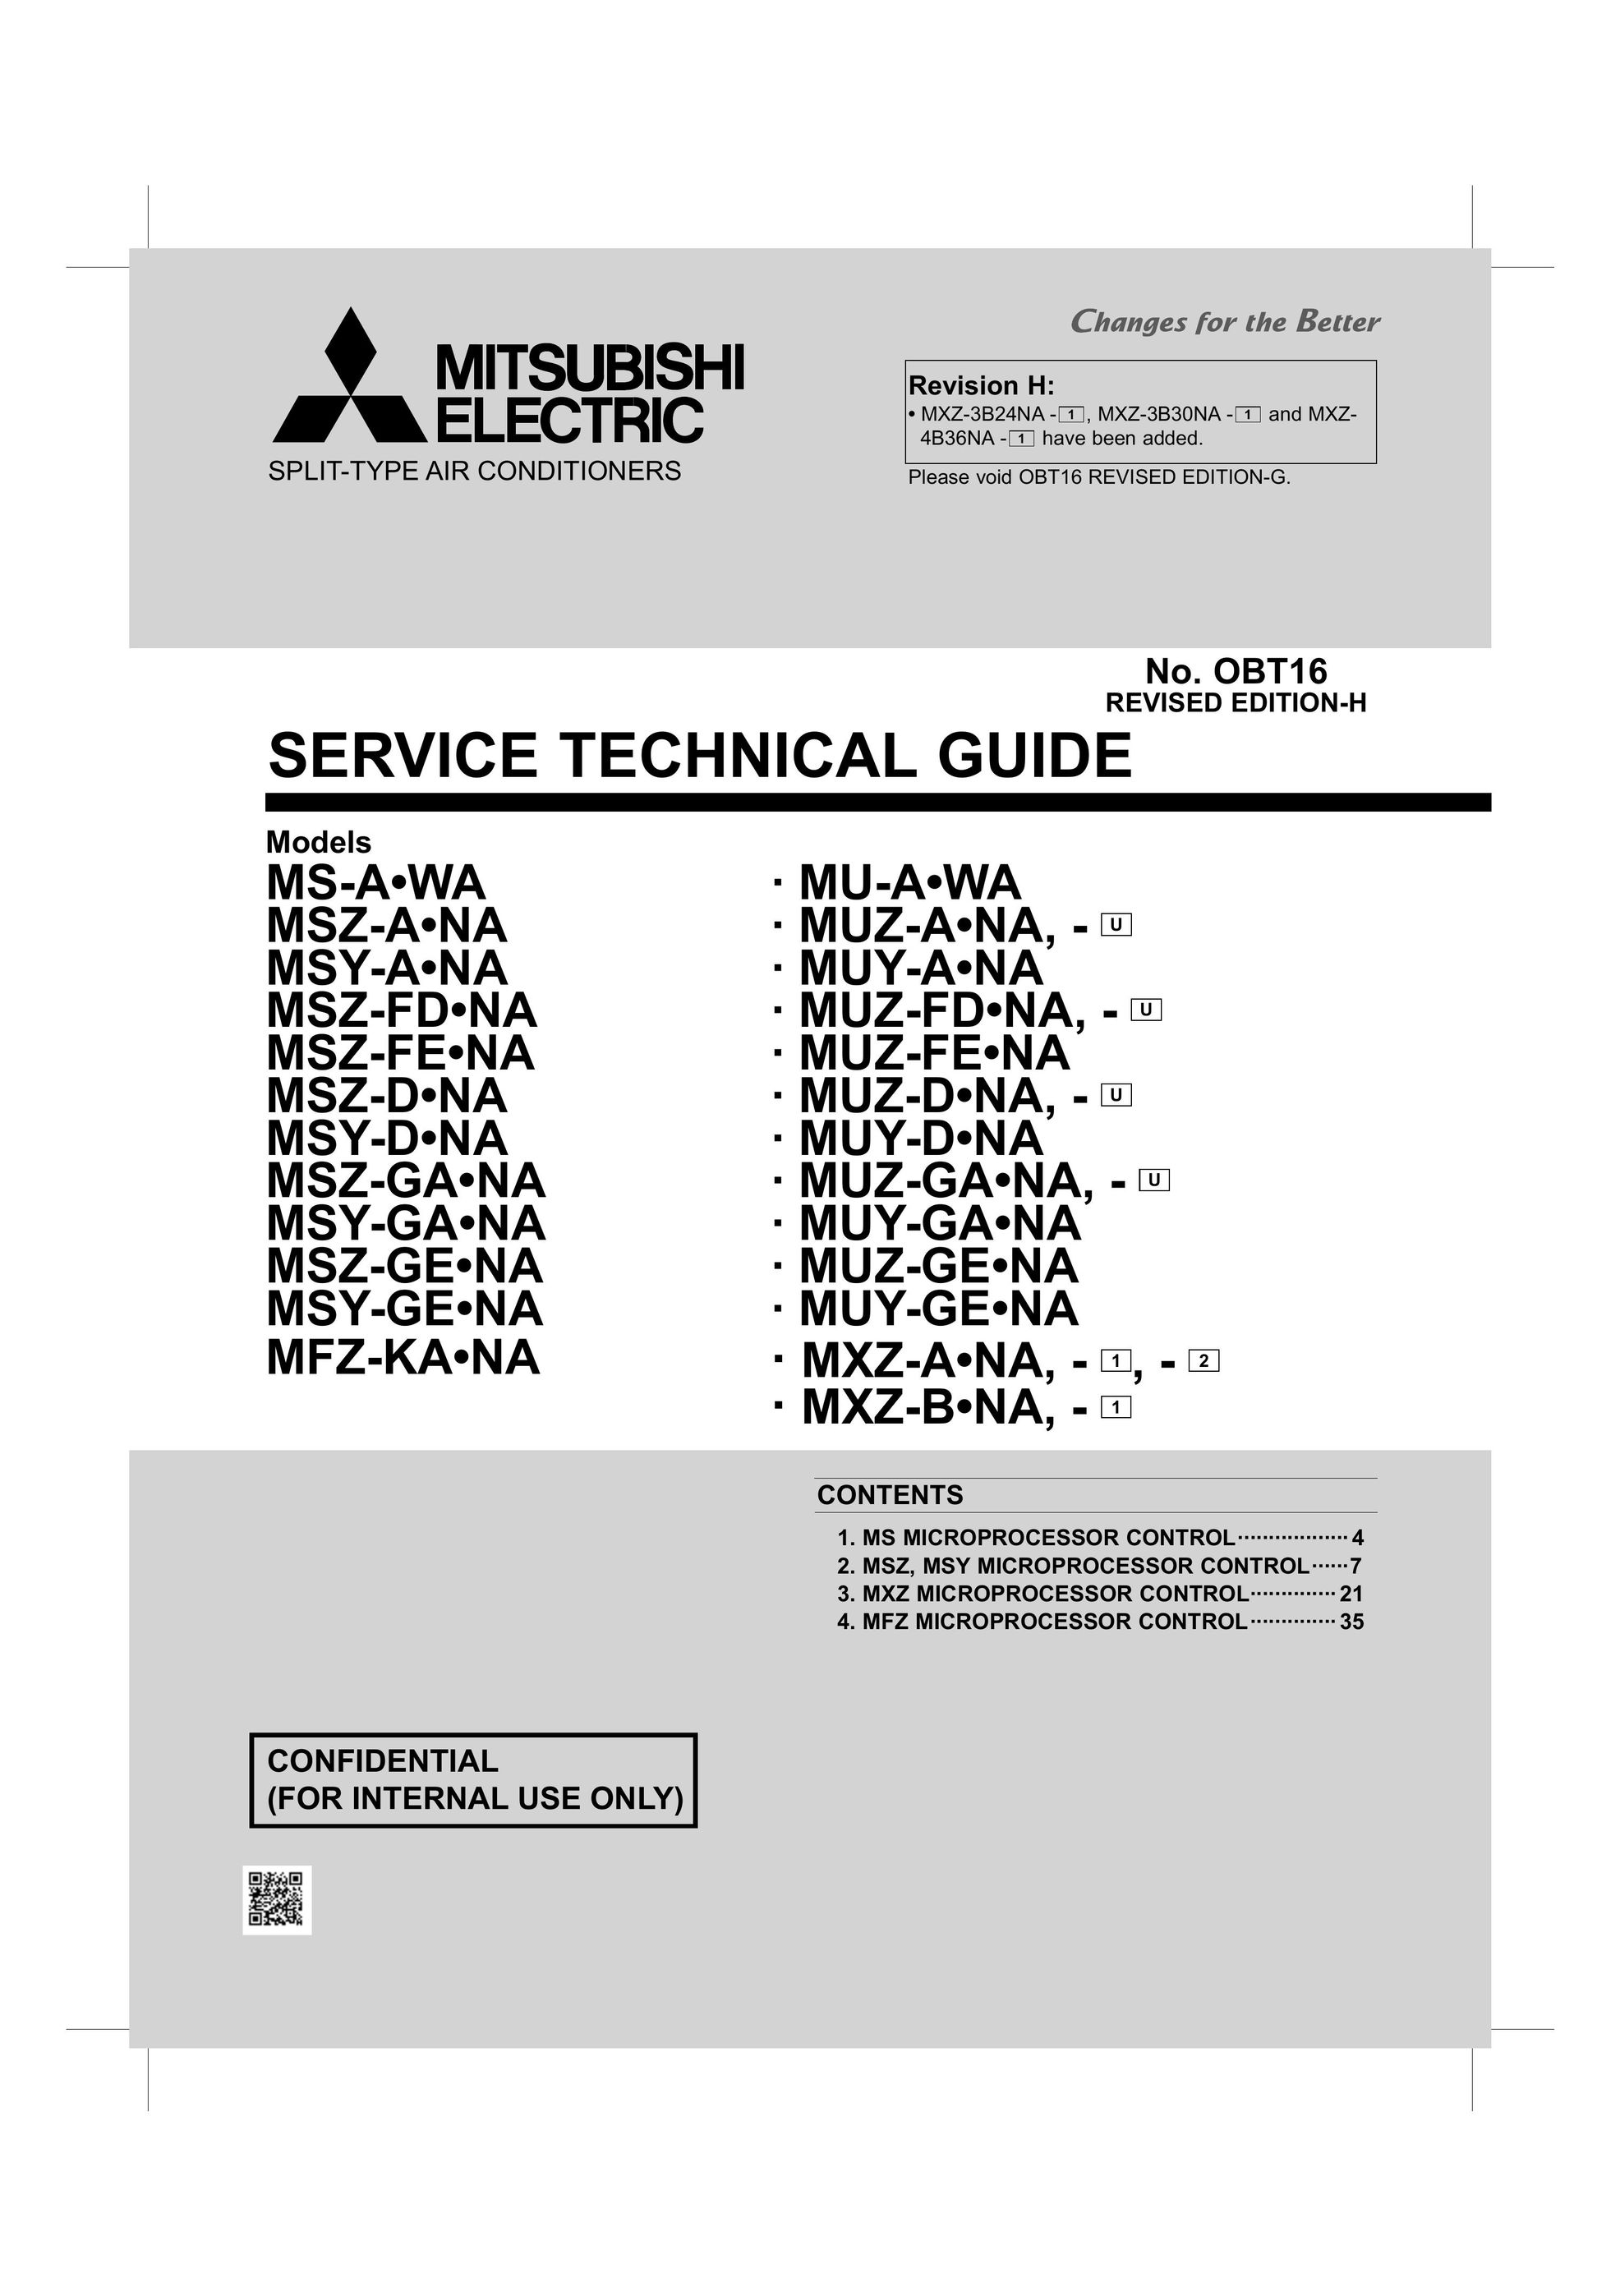 Mitsumi electronic MUY-ANA Air Conditioner User Manual